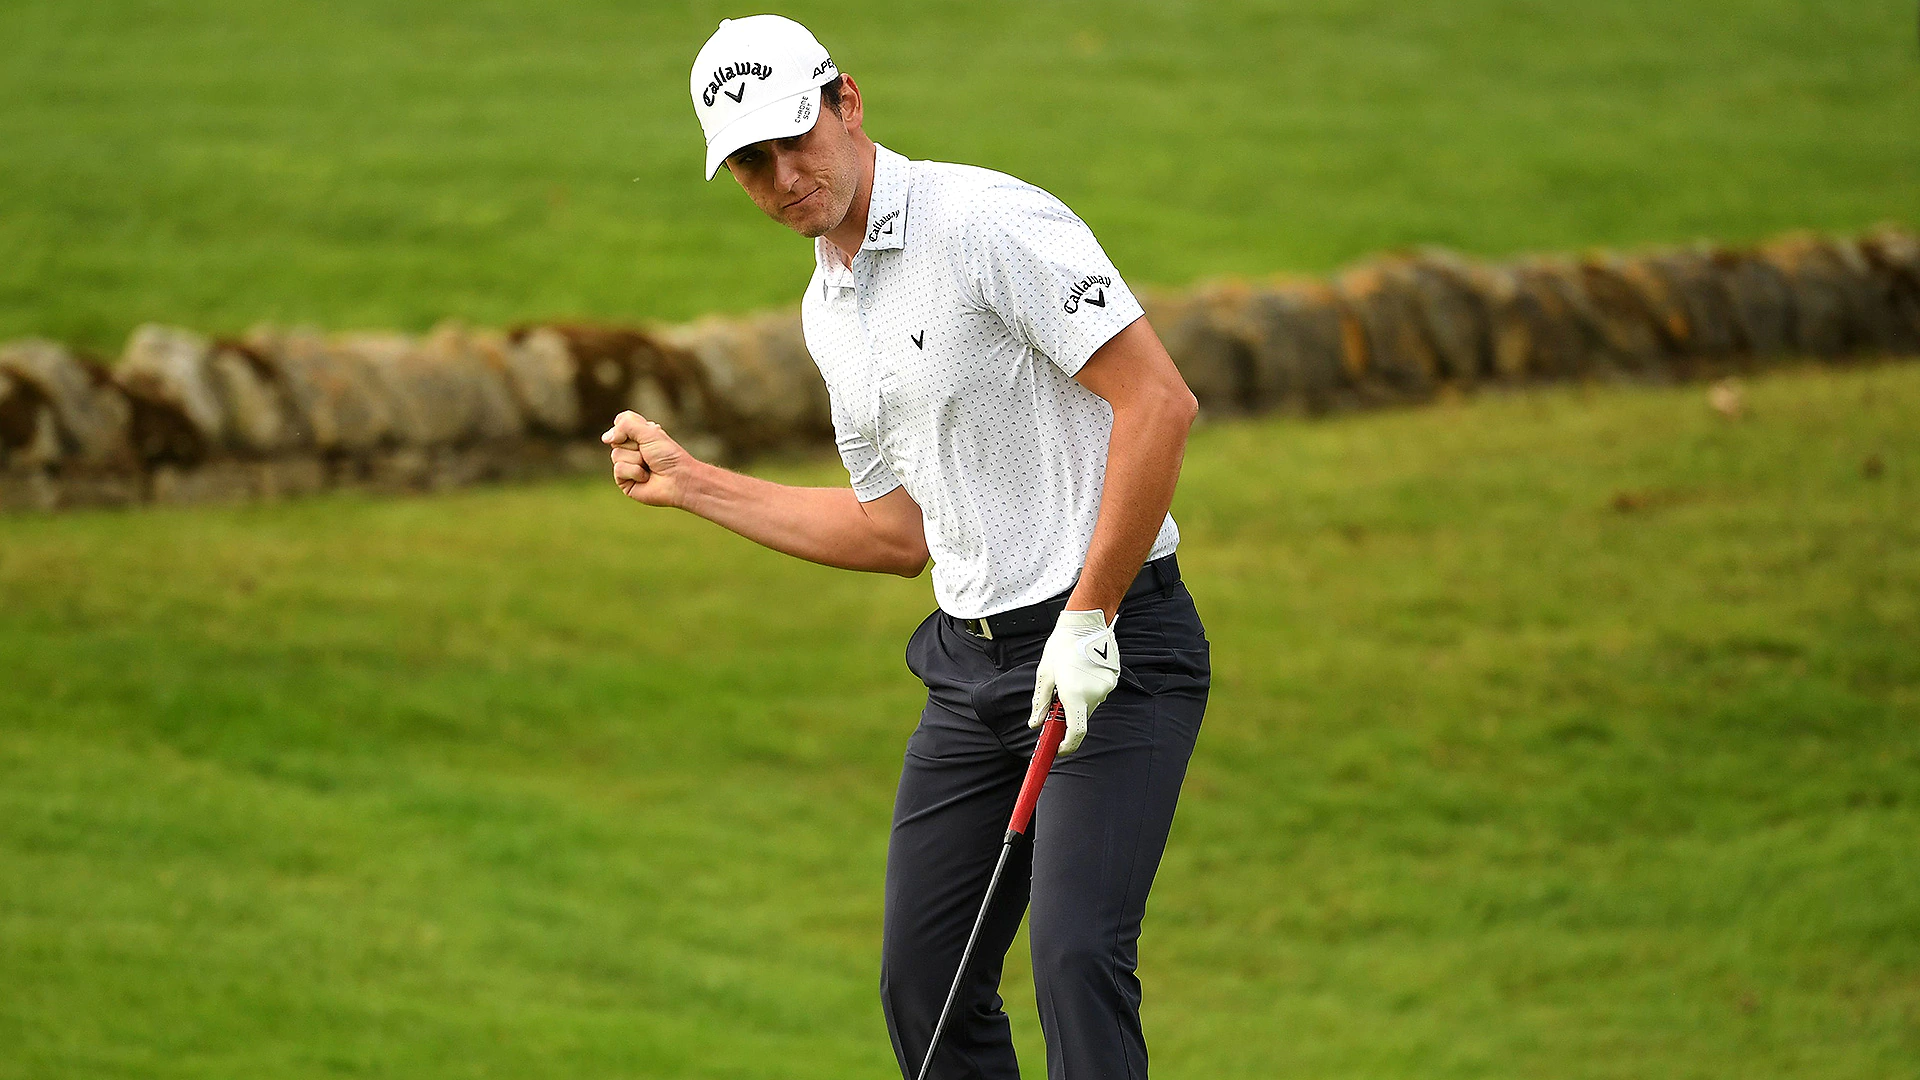 Renato Paratore leads through three rounds of British Masters; Sam Horsfield fires 61